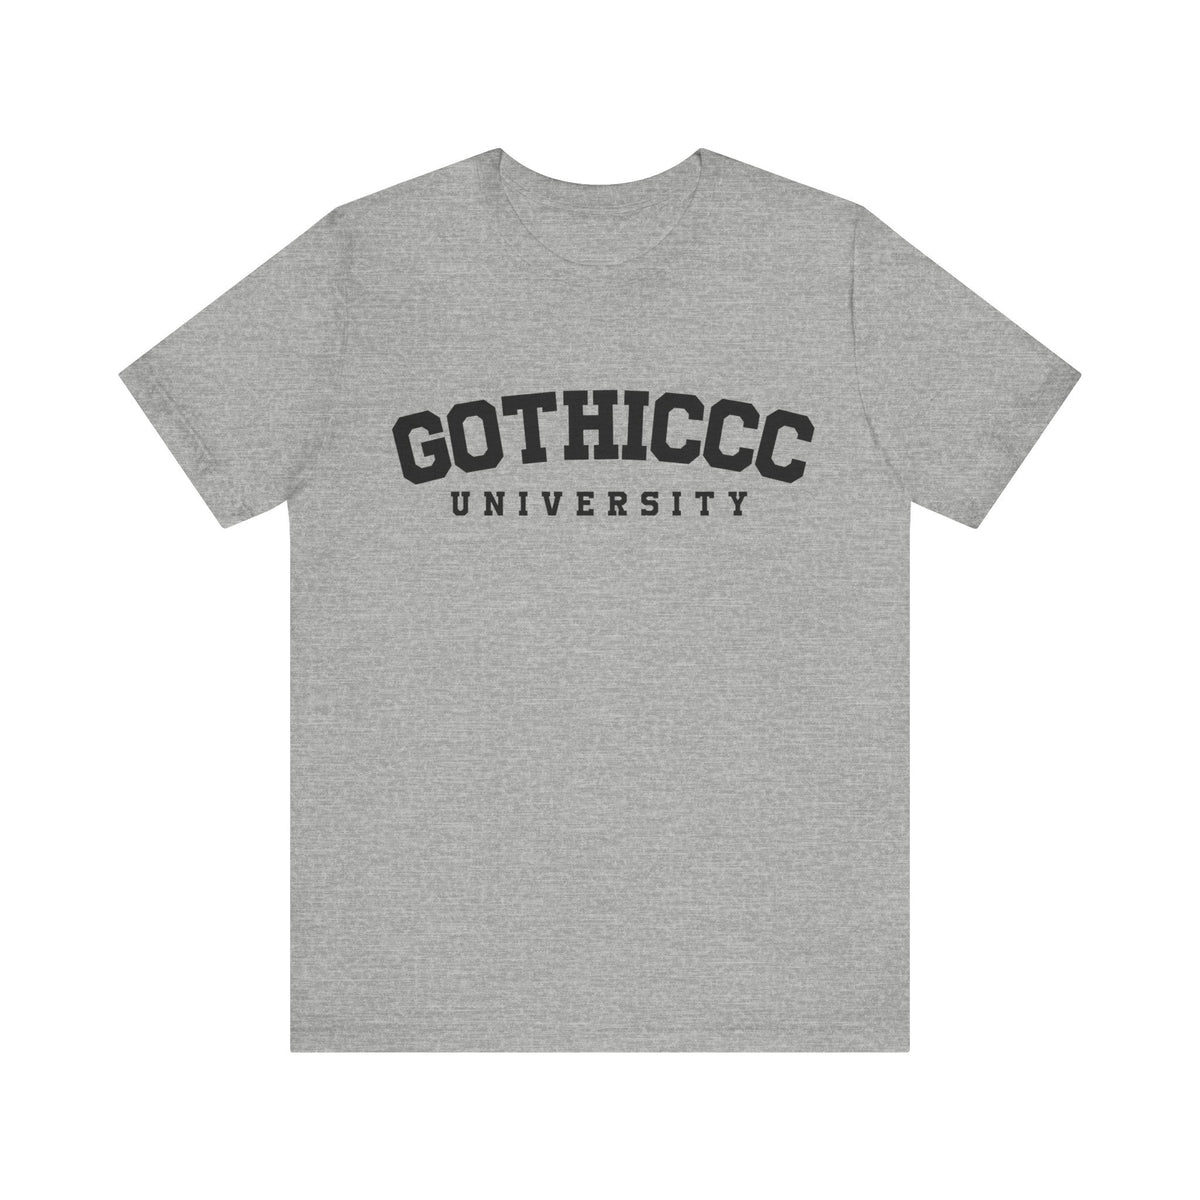 Gothiccc University Short Sleeve Tee - Goth Cloth Co.T - Shirt29364261861463068786